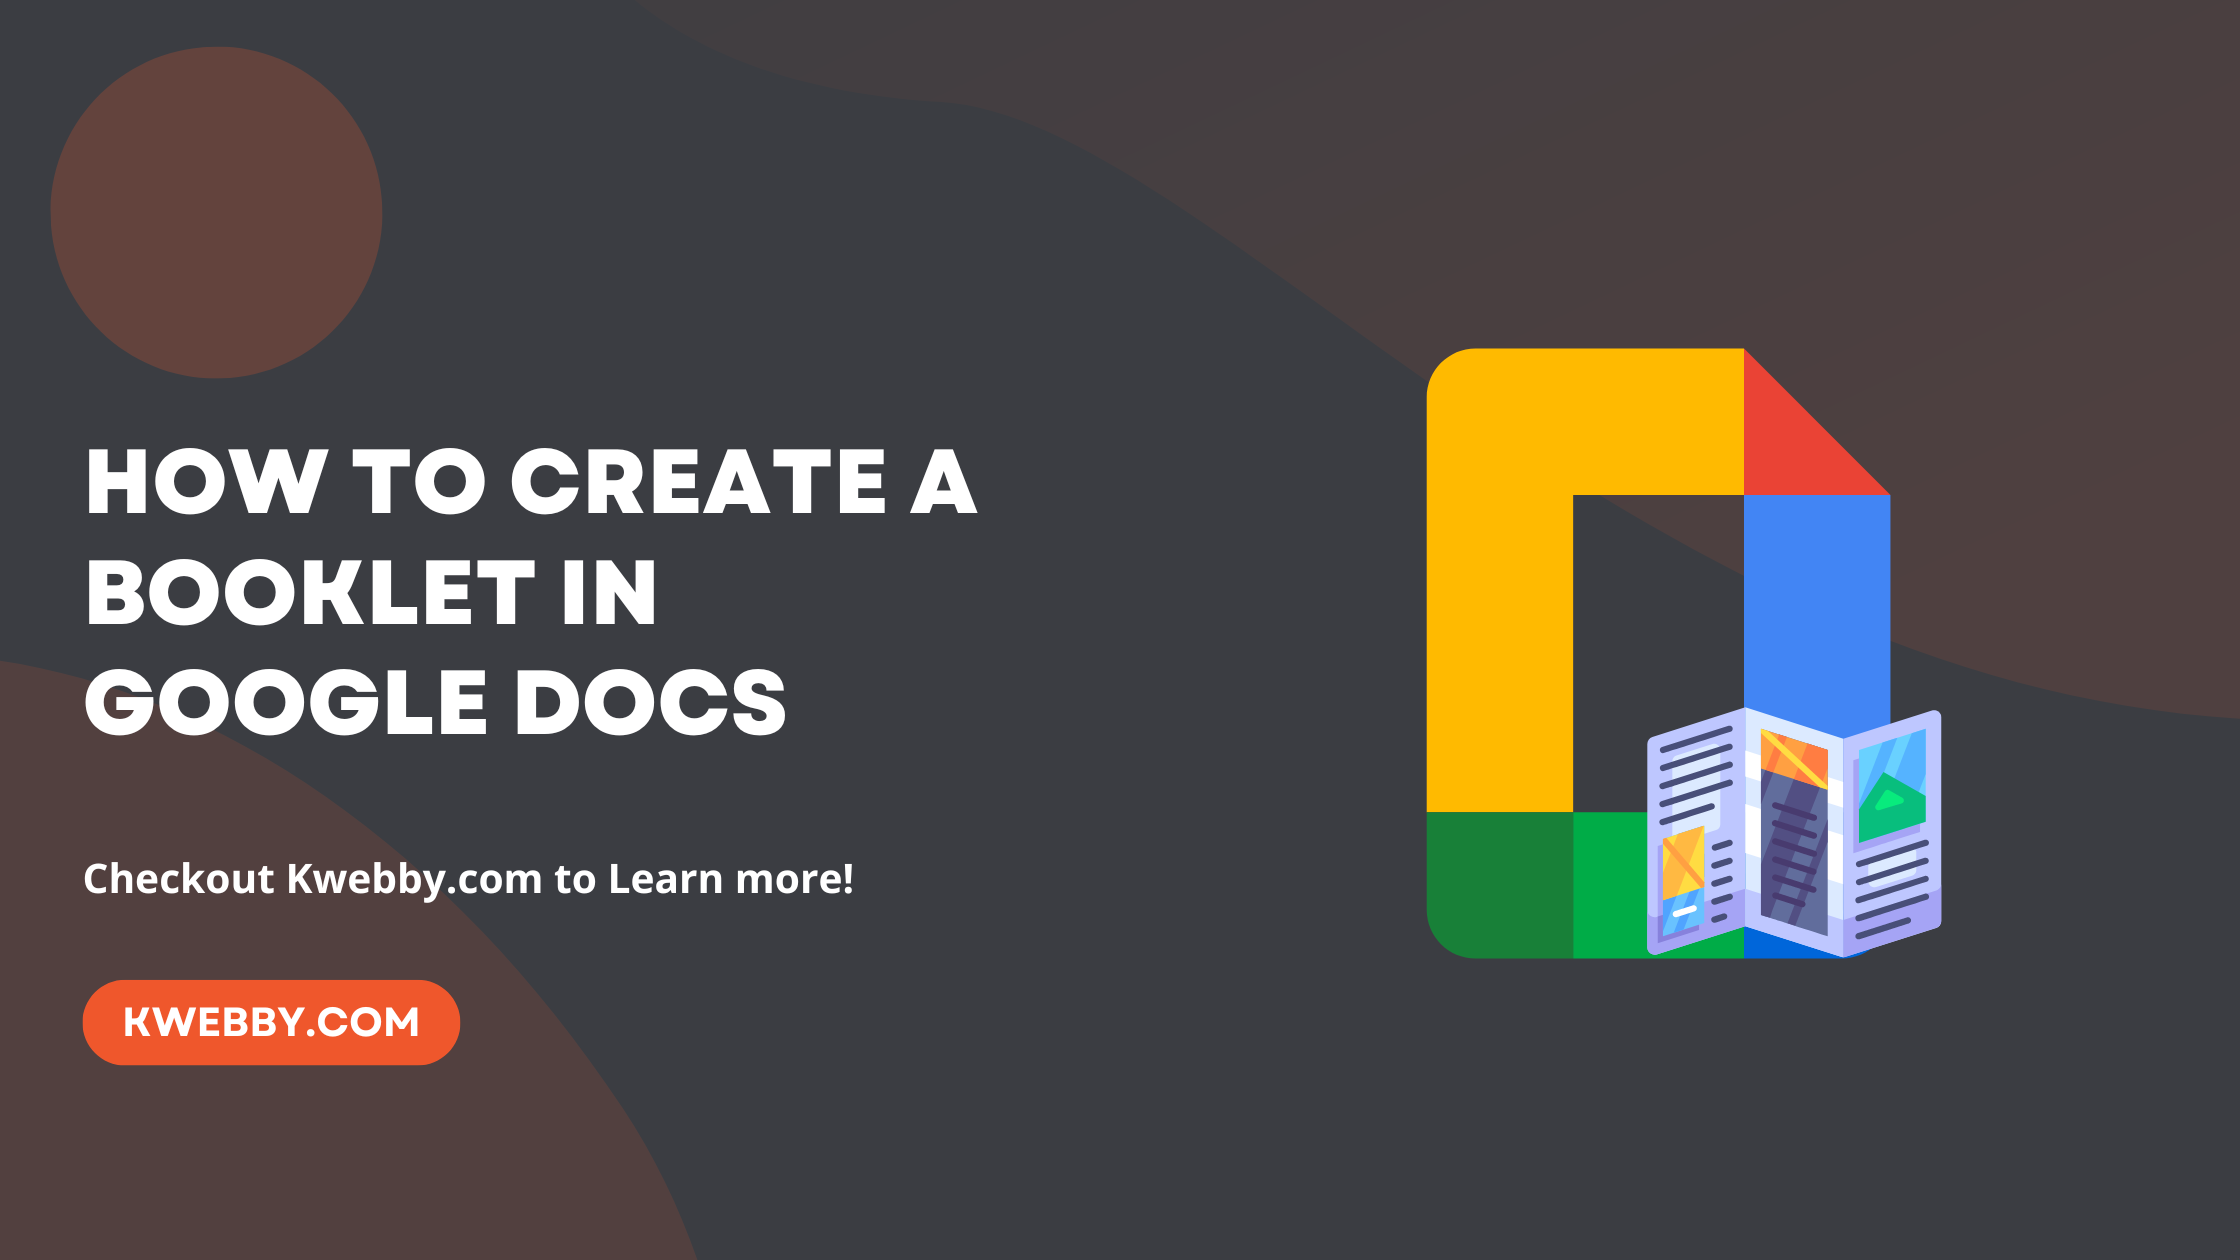 How to create a booklet in Google Docs